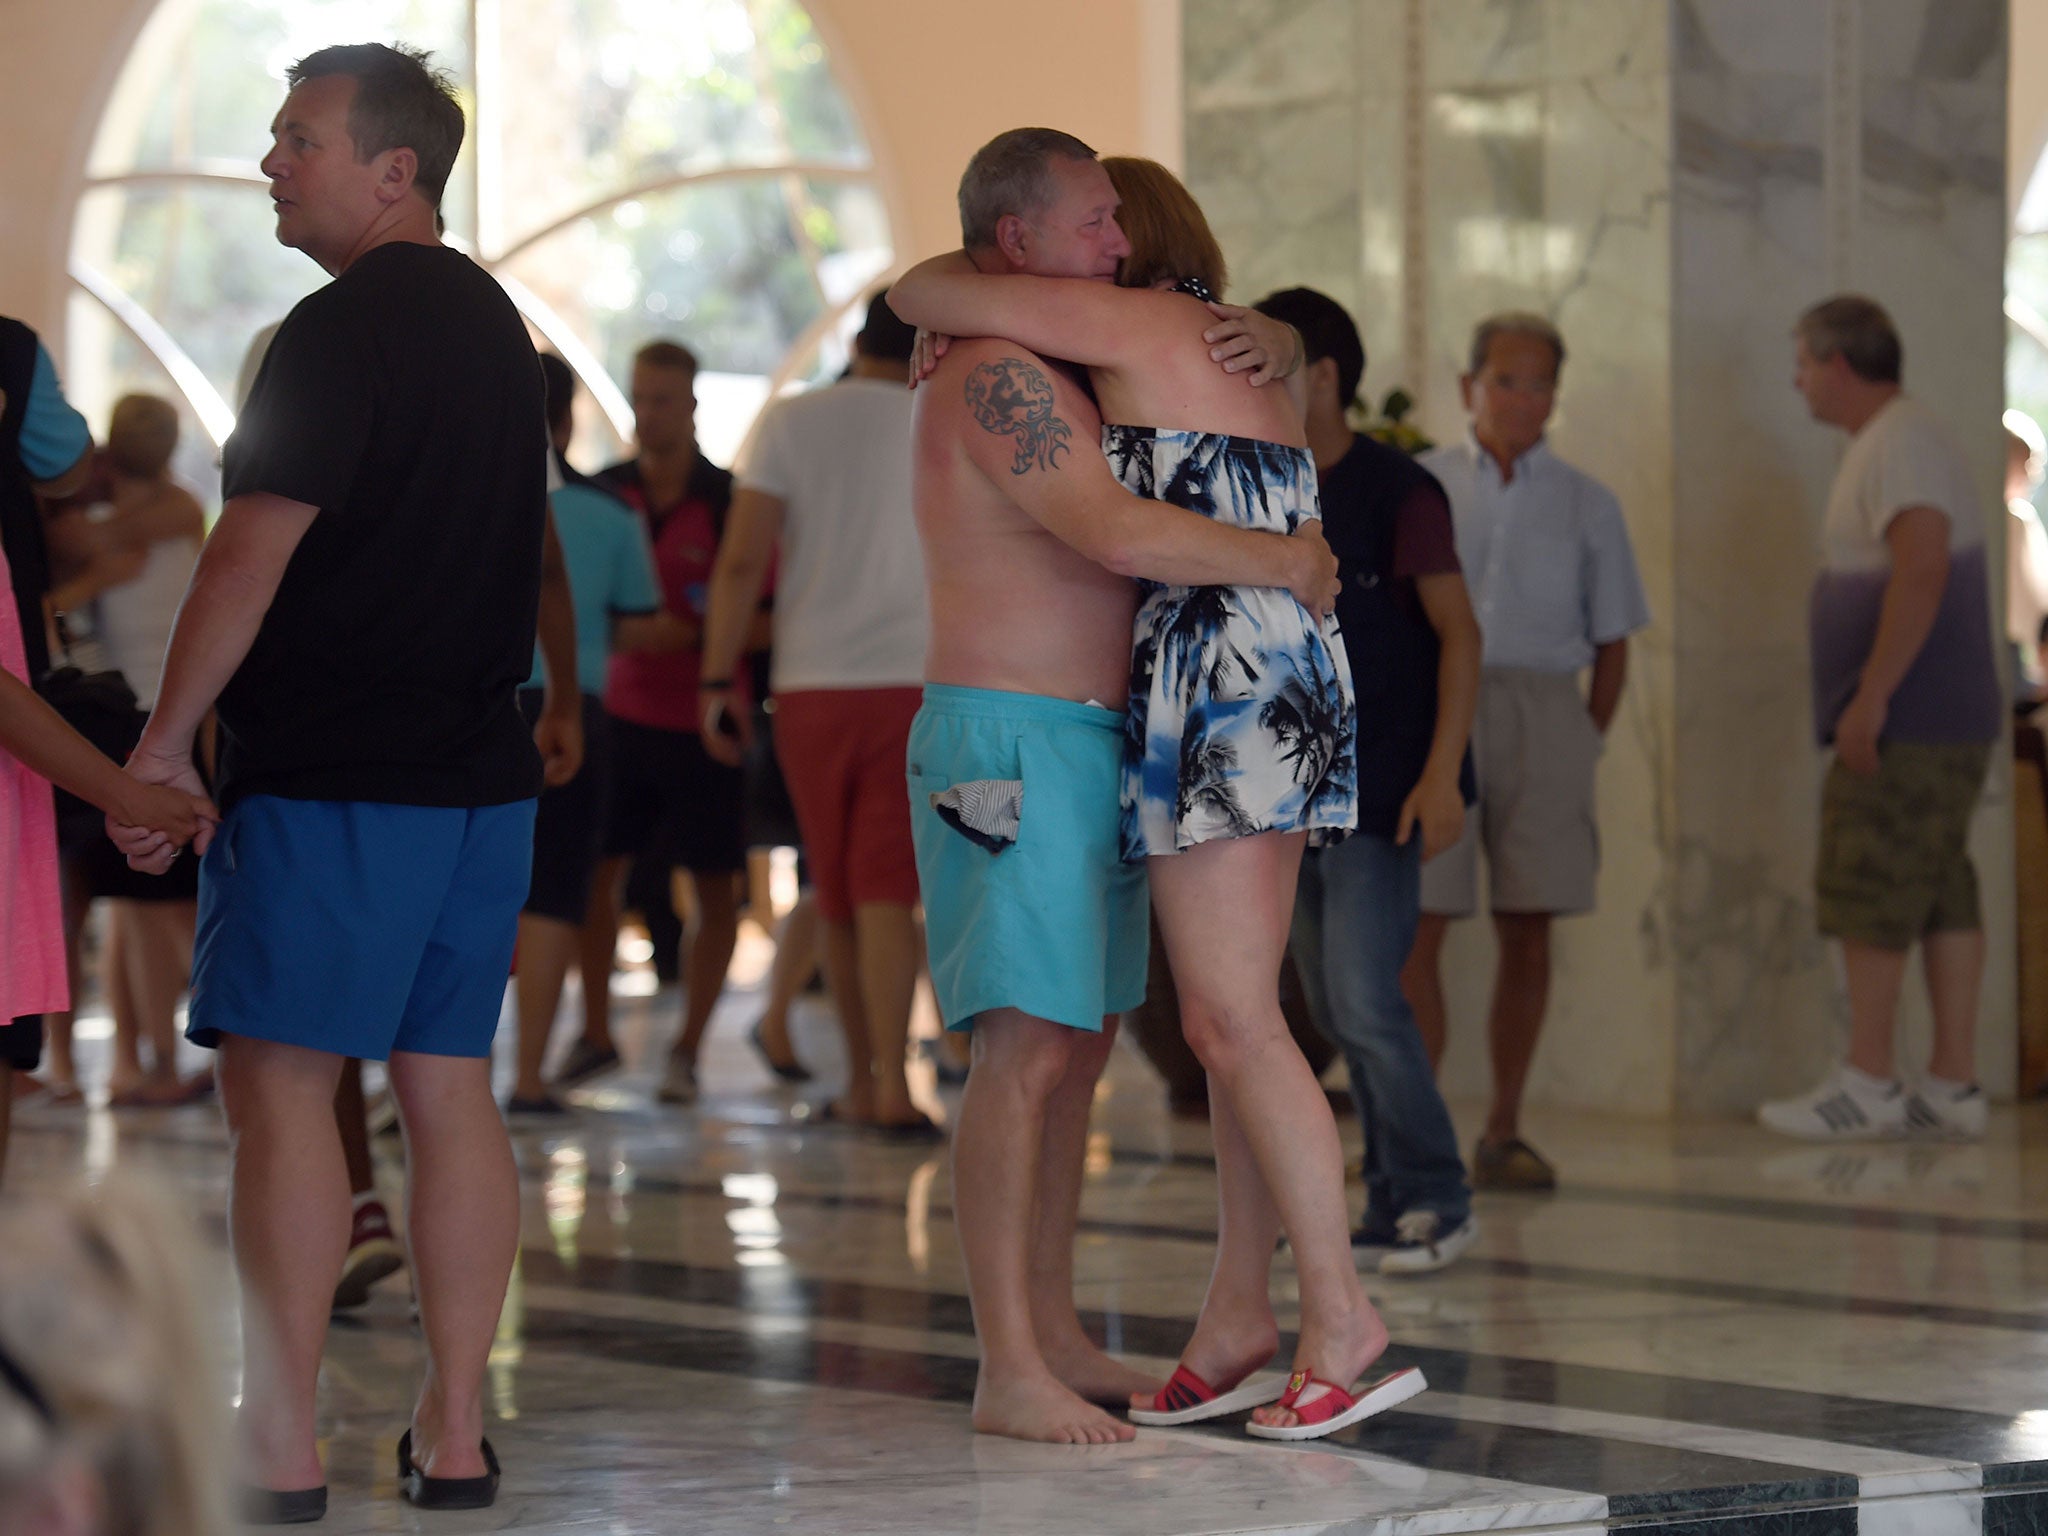 Tourists comfort each other after the mass shooting in the resort town of Sousse